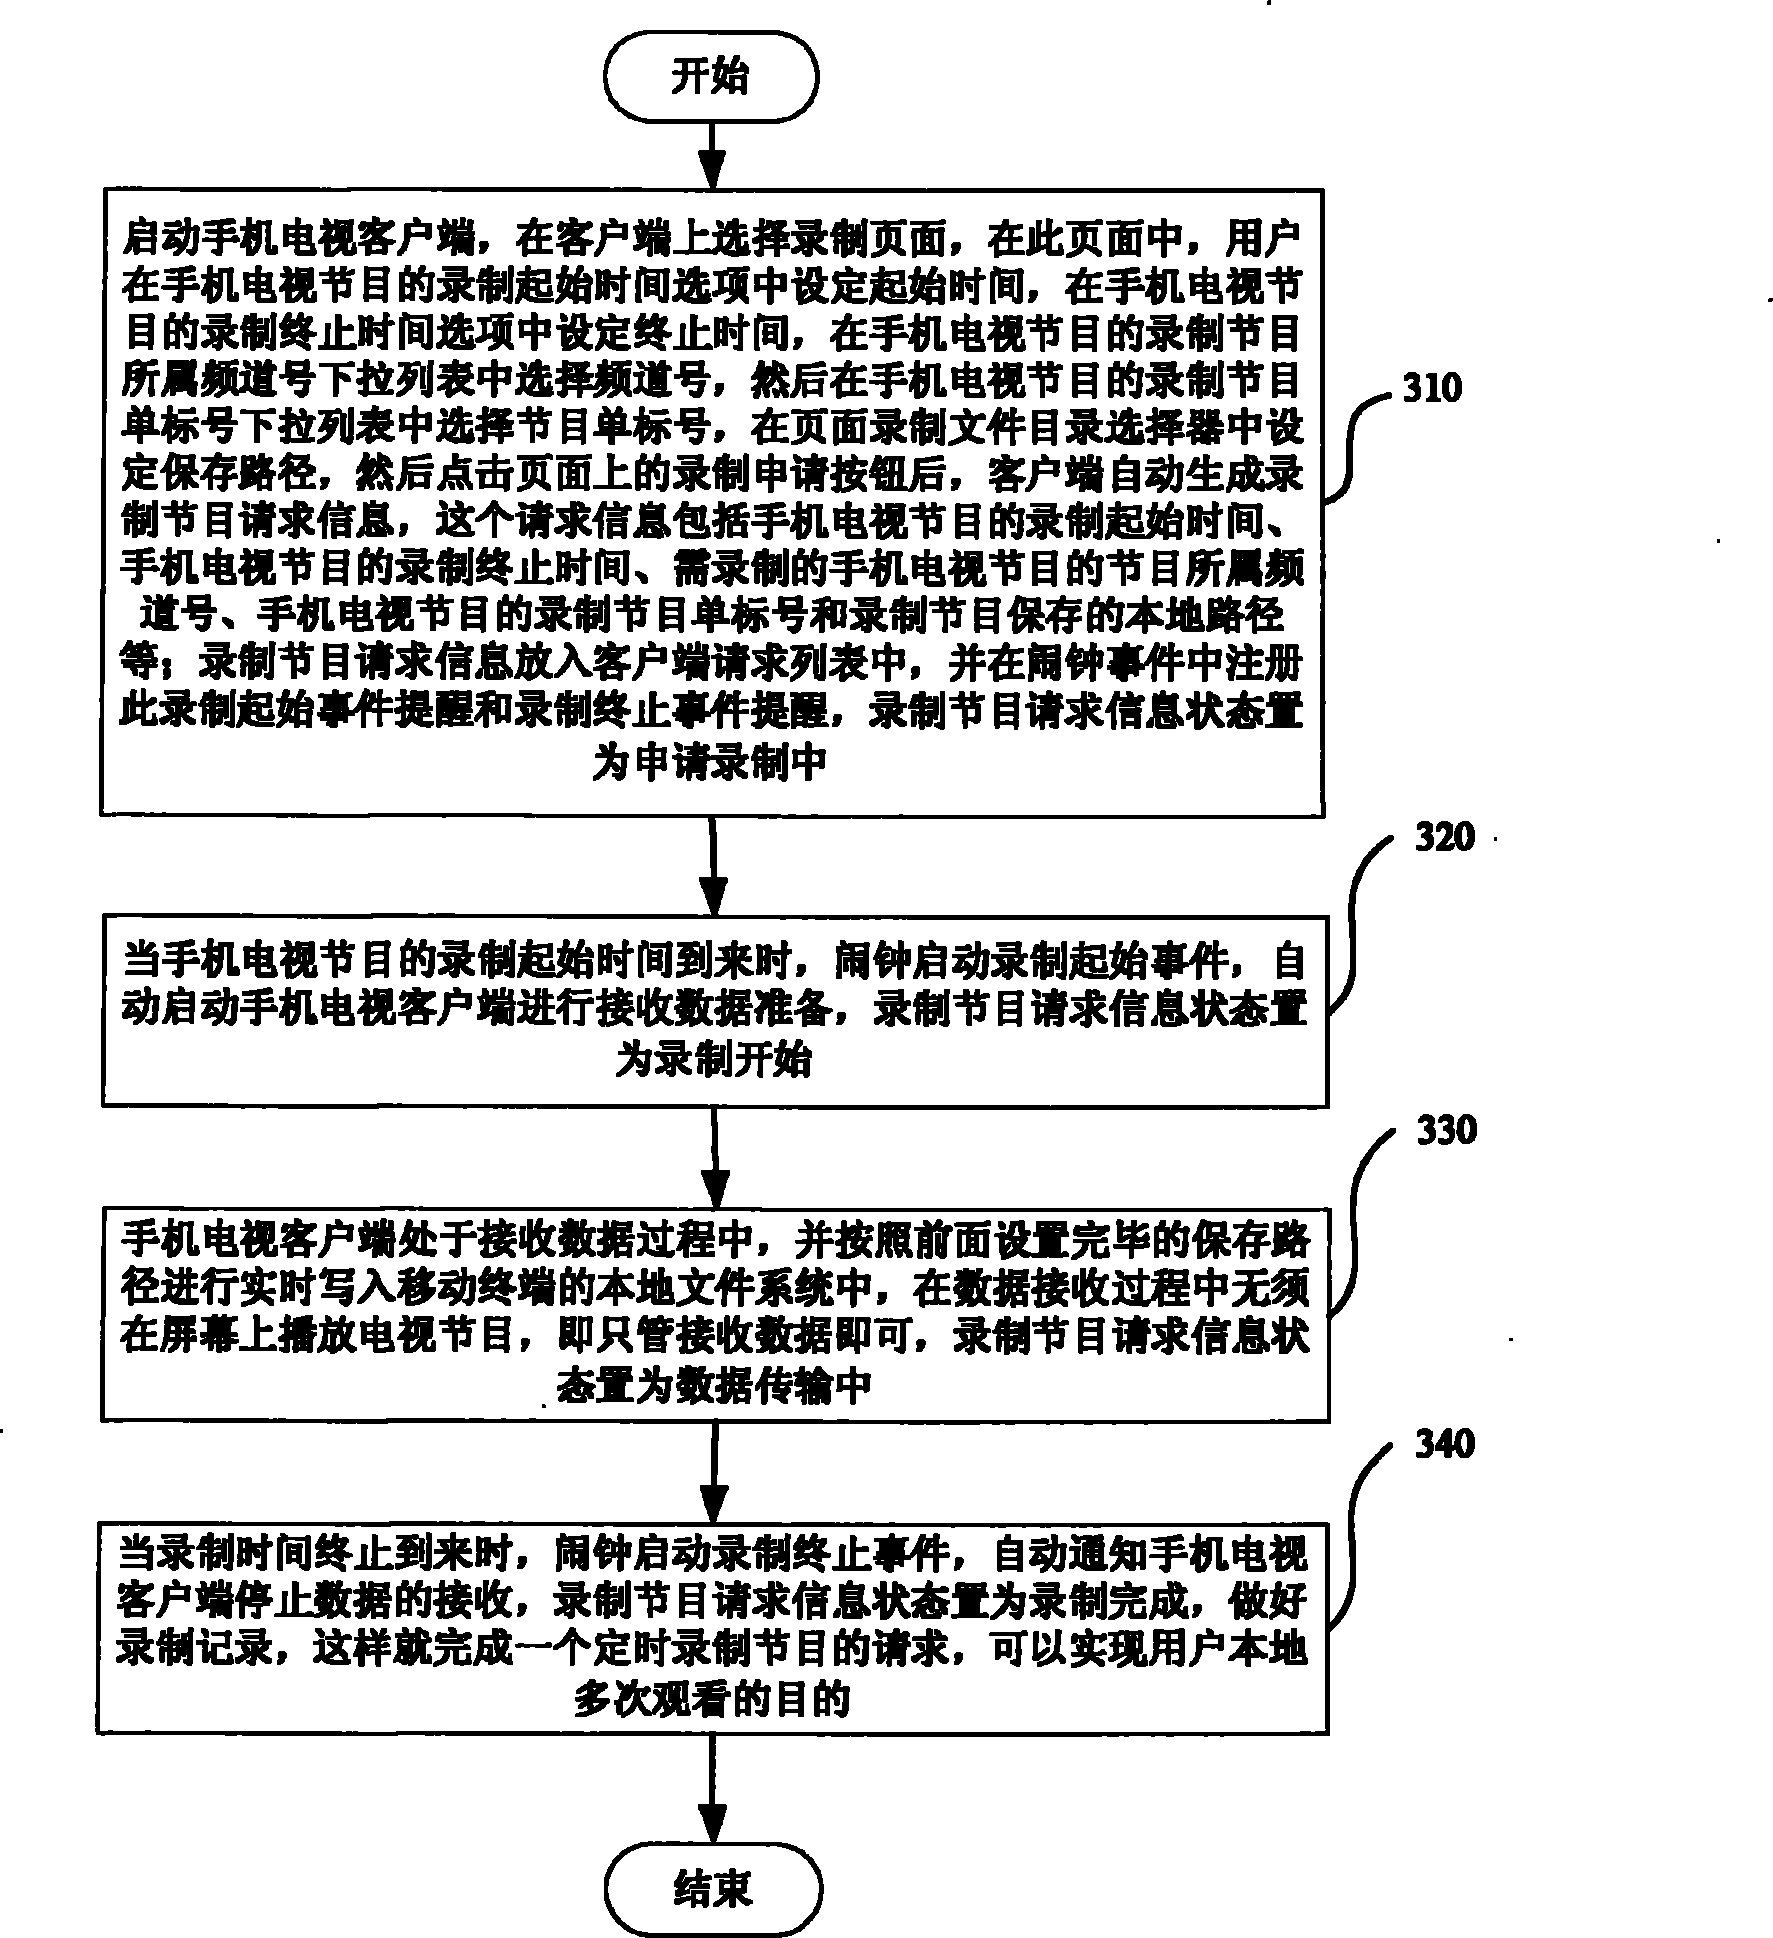 Mobile terminal and method for timed recording mobile phone television program